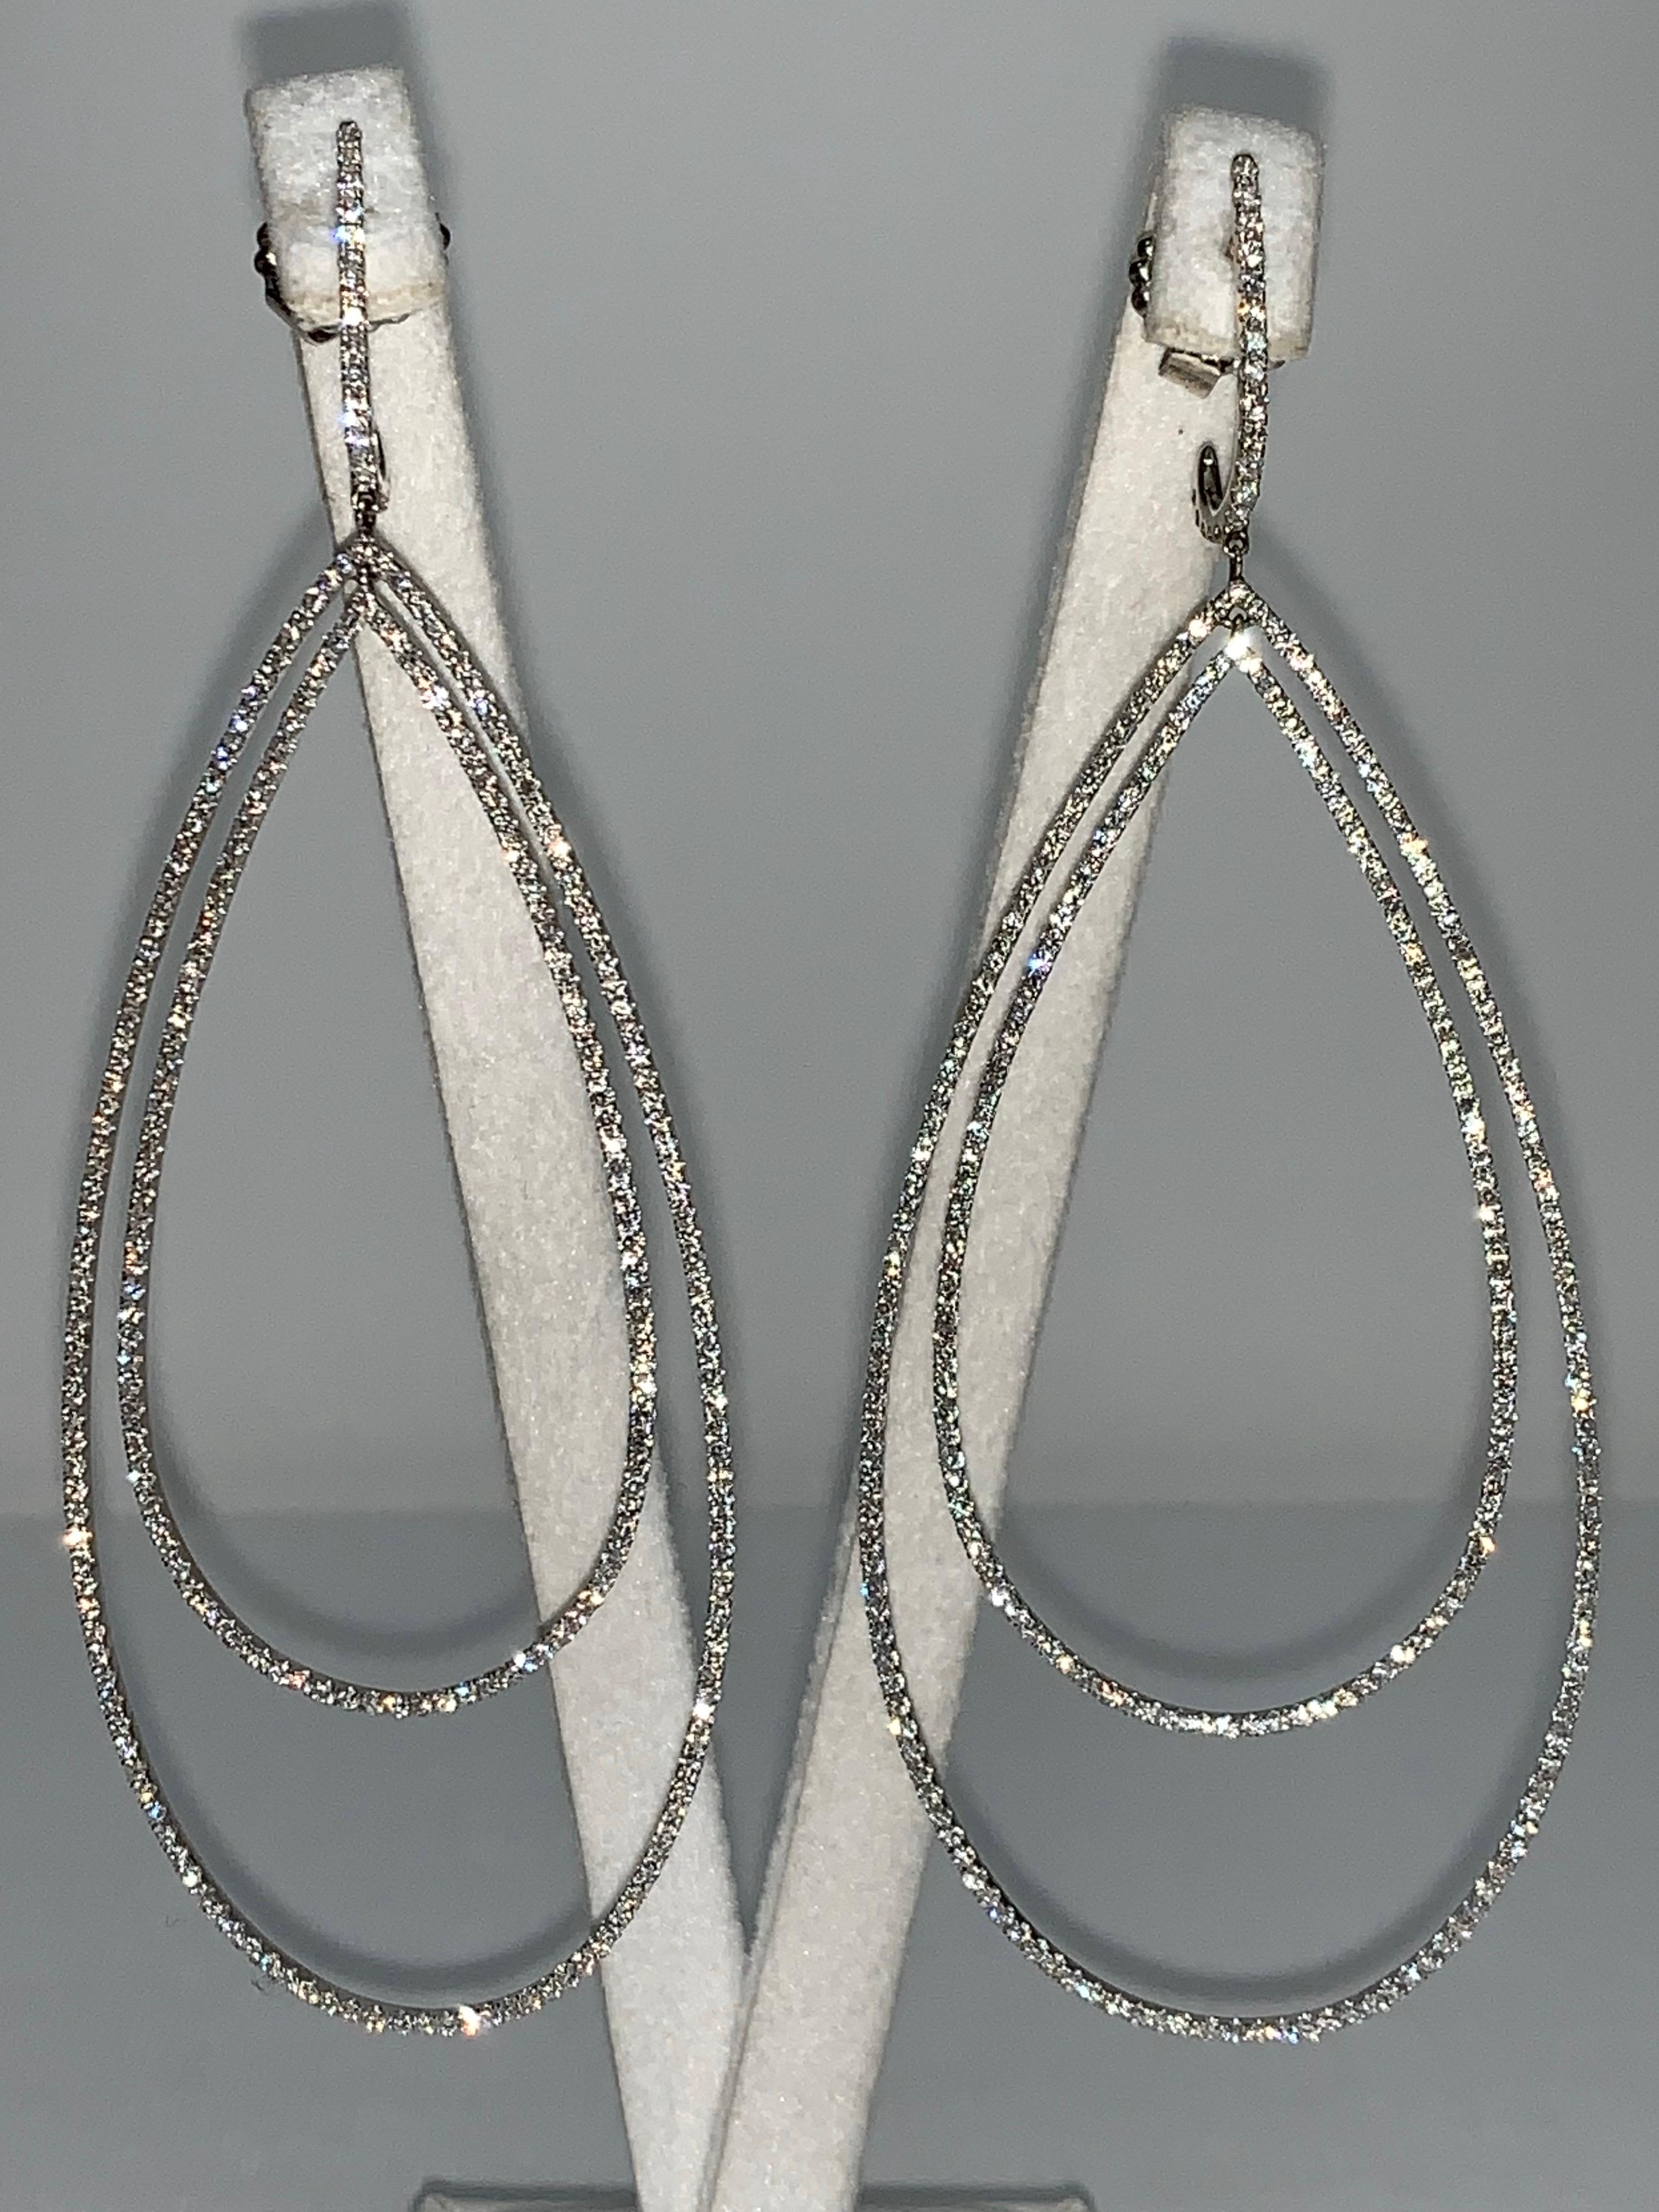 White Pavé Diamond, White Gold Double Tear Drop Earrings. 

Featuring a pair of White Pavé Diamond Tear Drop Earrings with a total weight of 3.32 carats, set in 18K White Gold. 

This one-of-a-kind pair of earrings was created by hand and in CAD,